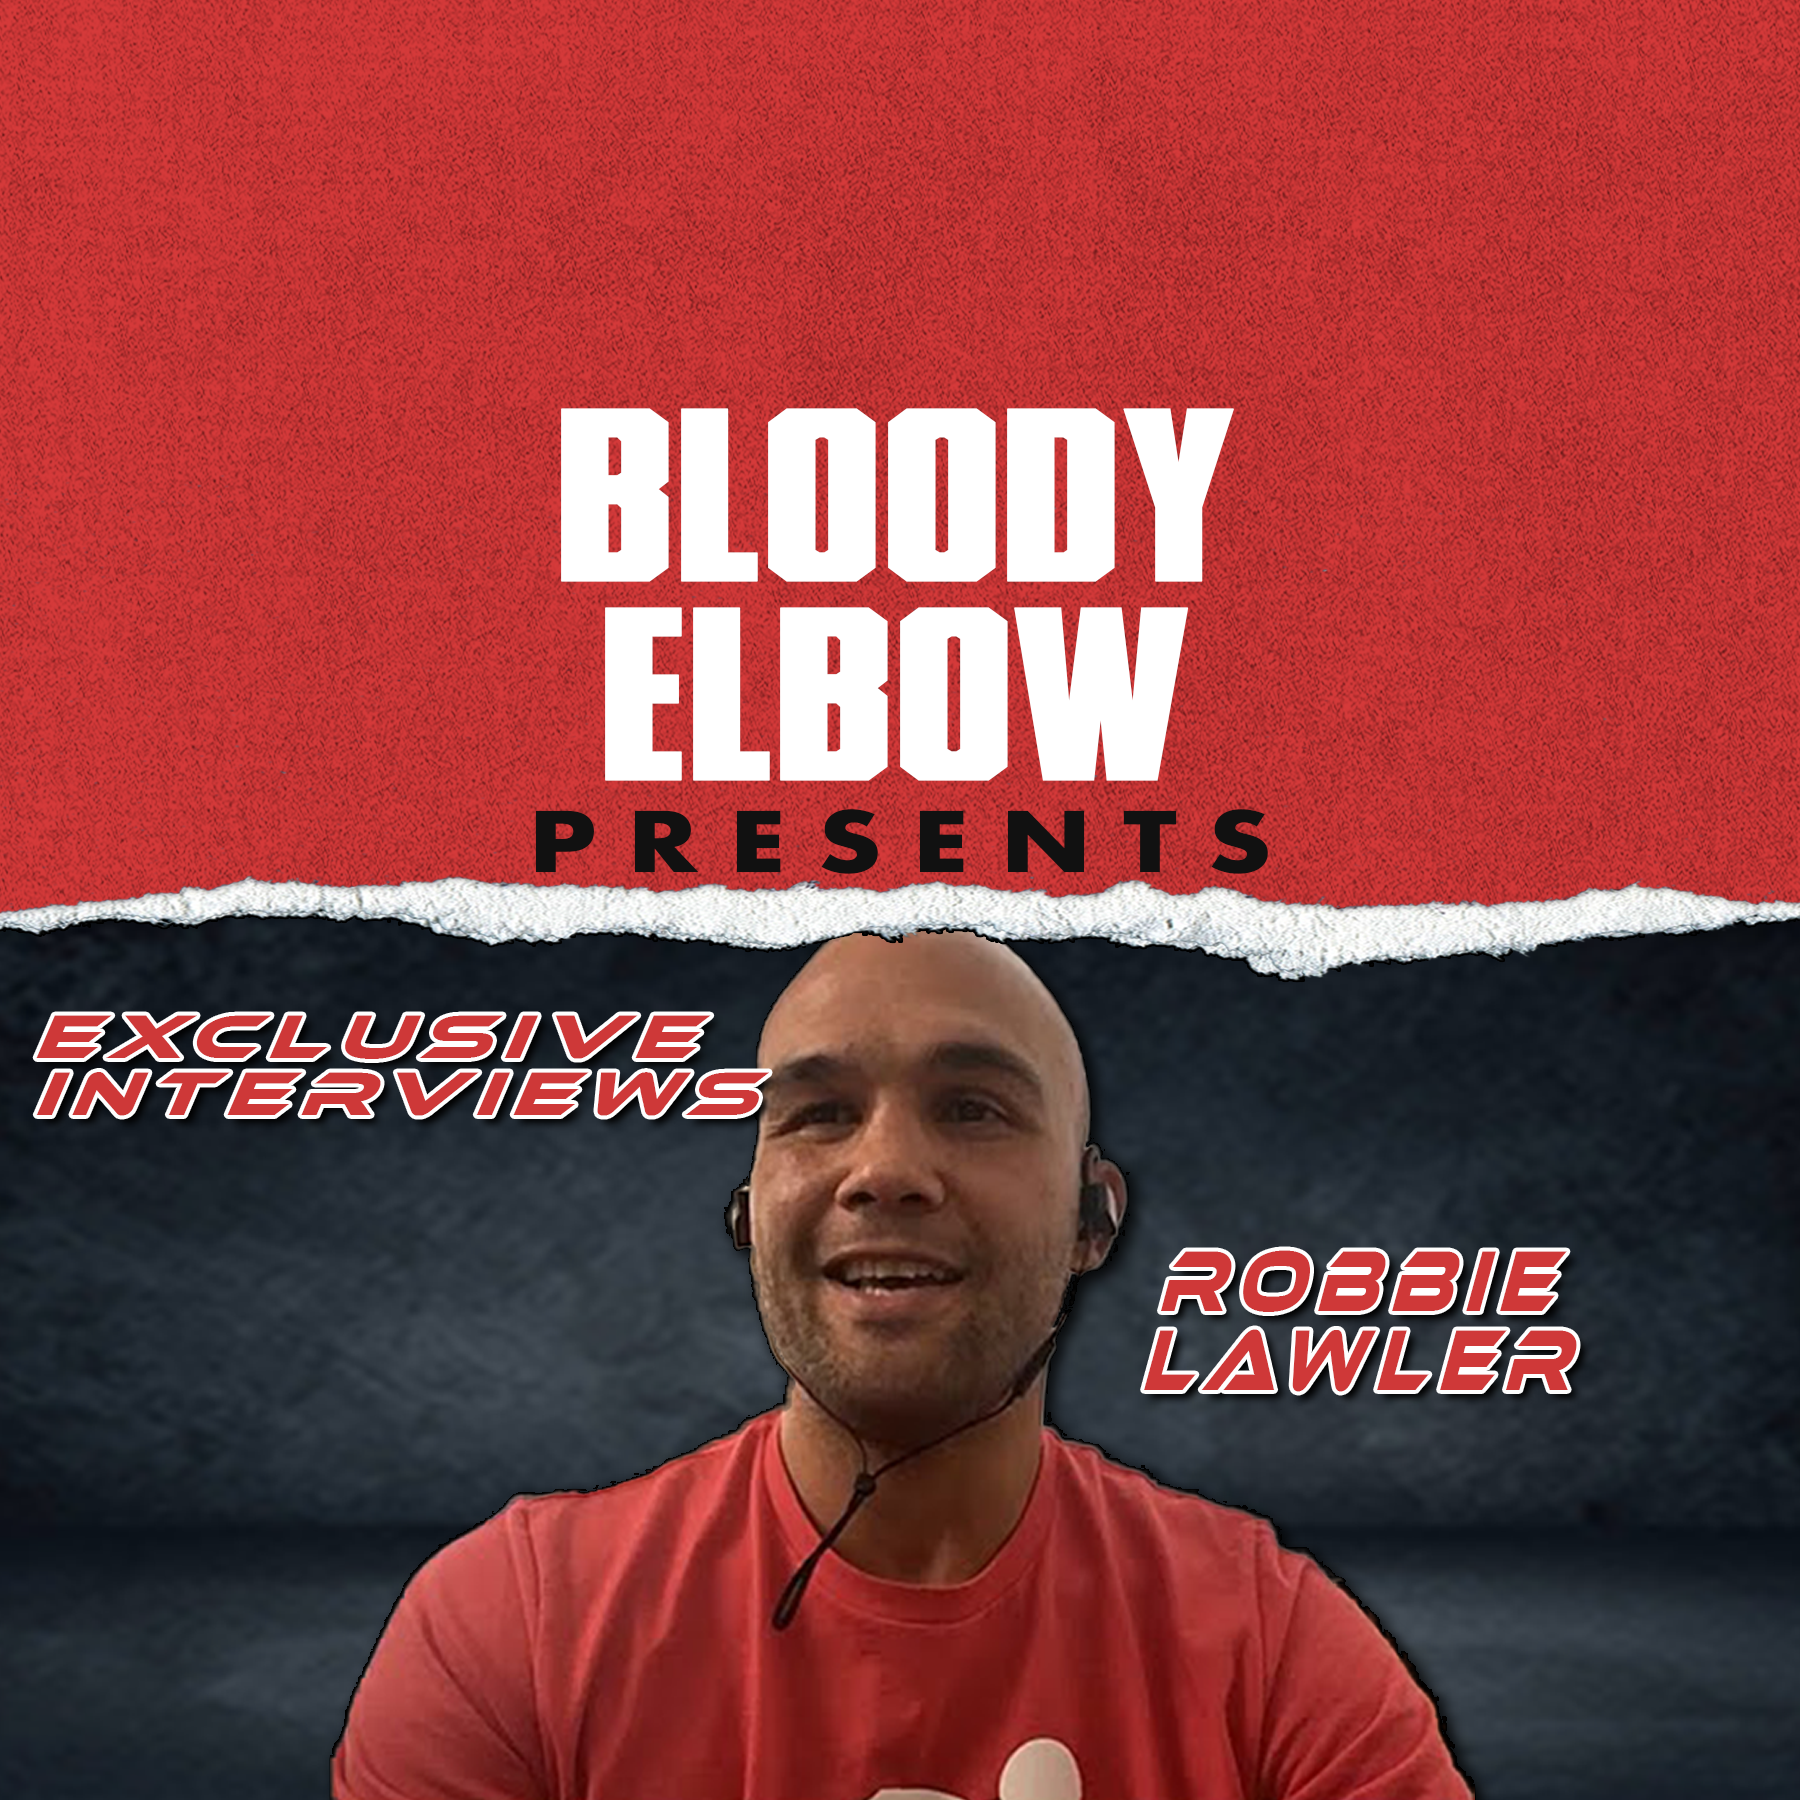 “Ruthless” Robbie Lawler caught up with Eddie Mercado of Bloody Elbow for an interview